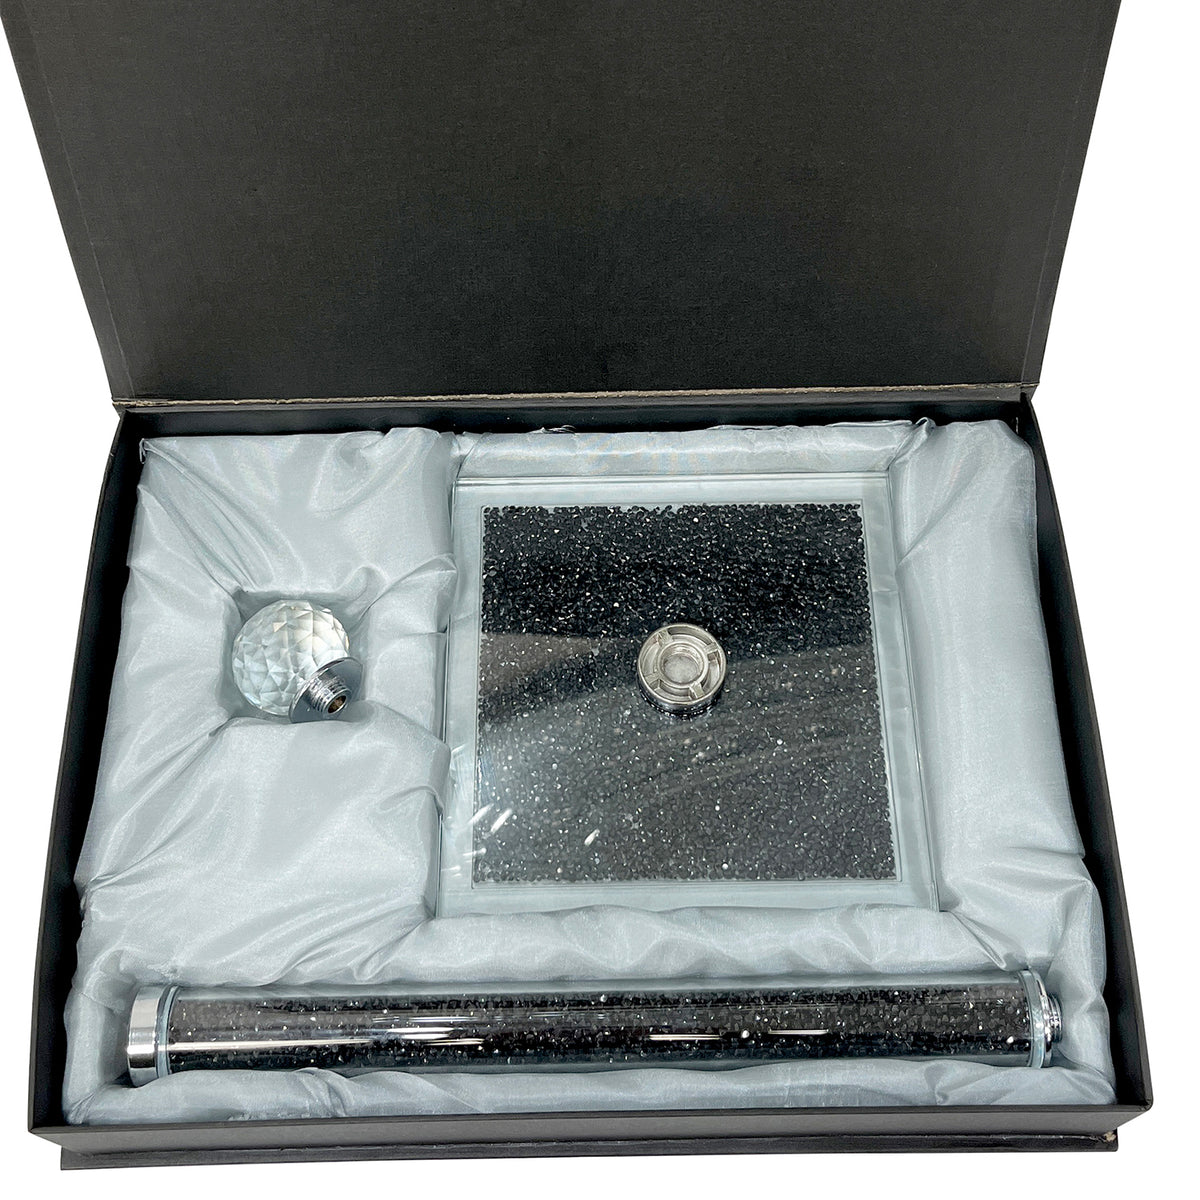 Silver Crushed Diamond Glass Paper Towel Holder in Gift Box